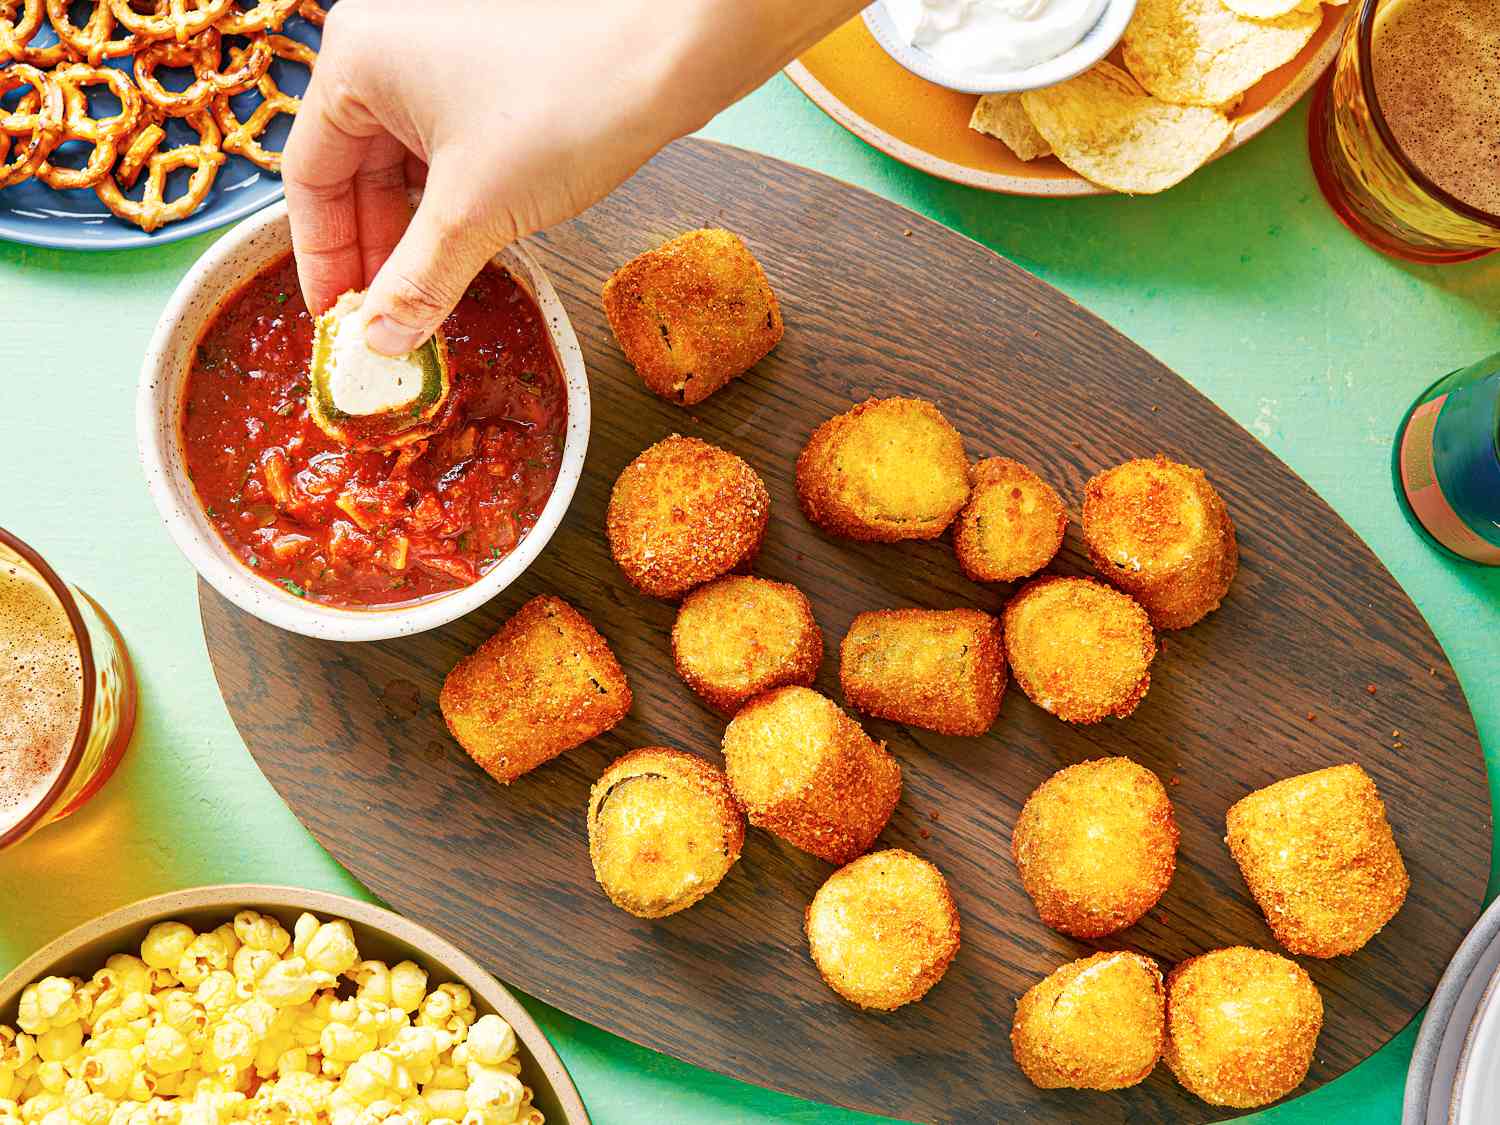 An oval wooden platter holding crispy deep-fried jalapeÃ±o poppers and a small bowl of tomato sauce. There is a hand dipping a popper into the tomato sauce, and the periphery of the image contains other snacks, such as pretzels, popcorn, and chips.